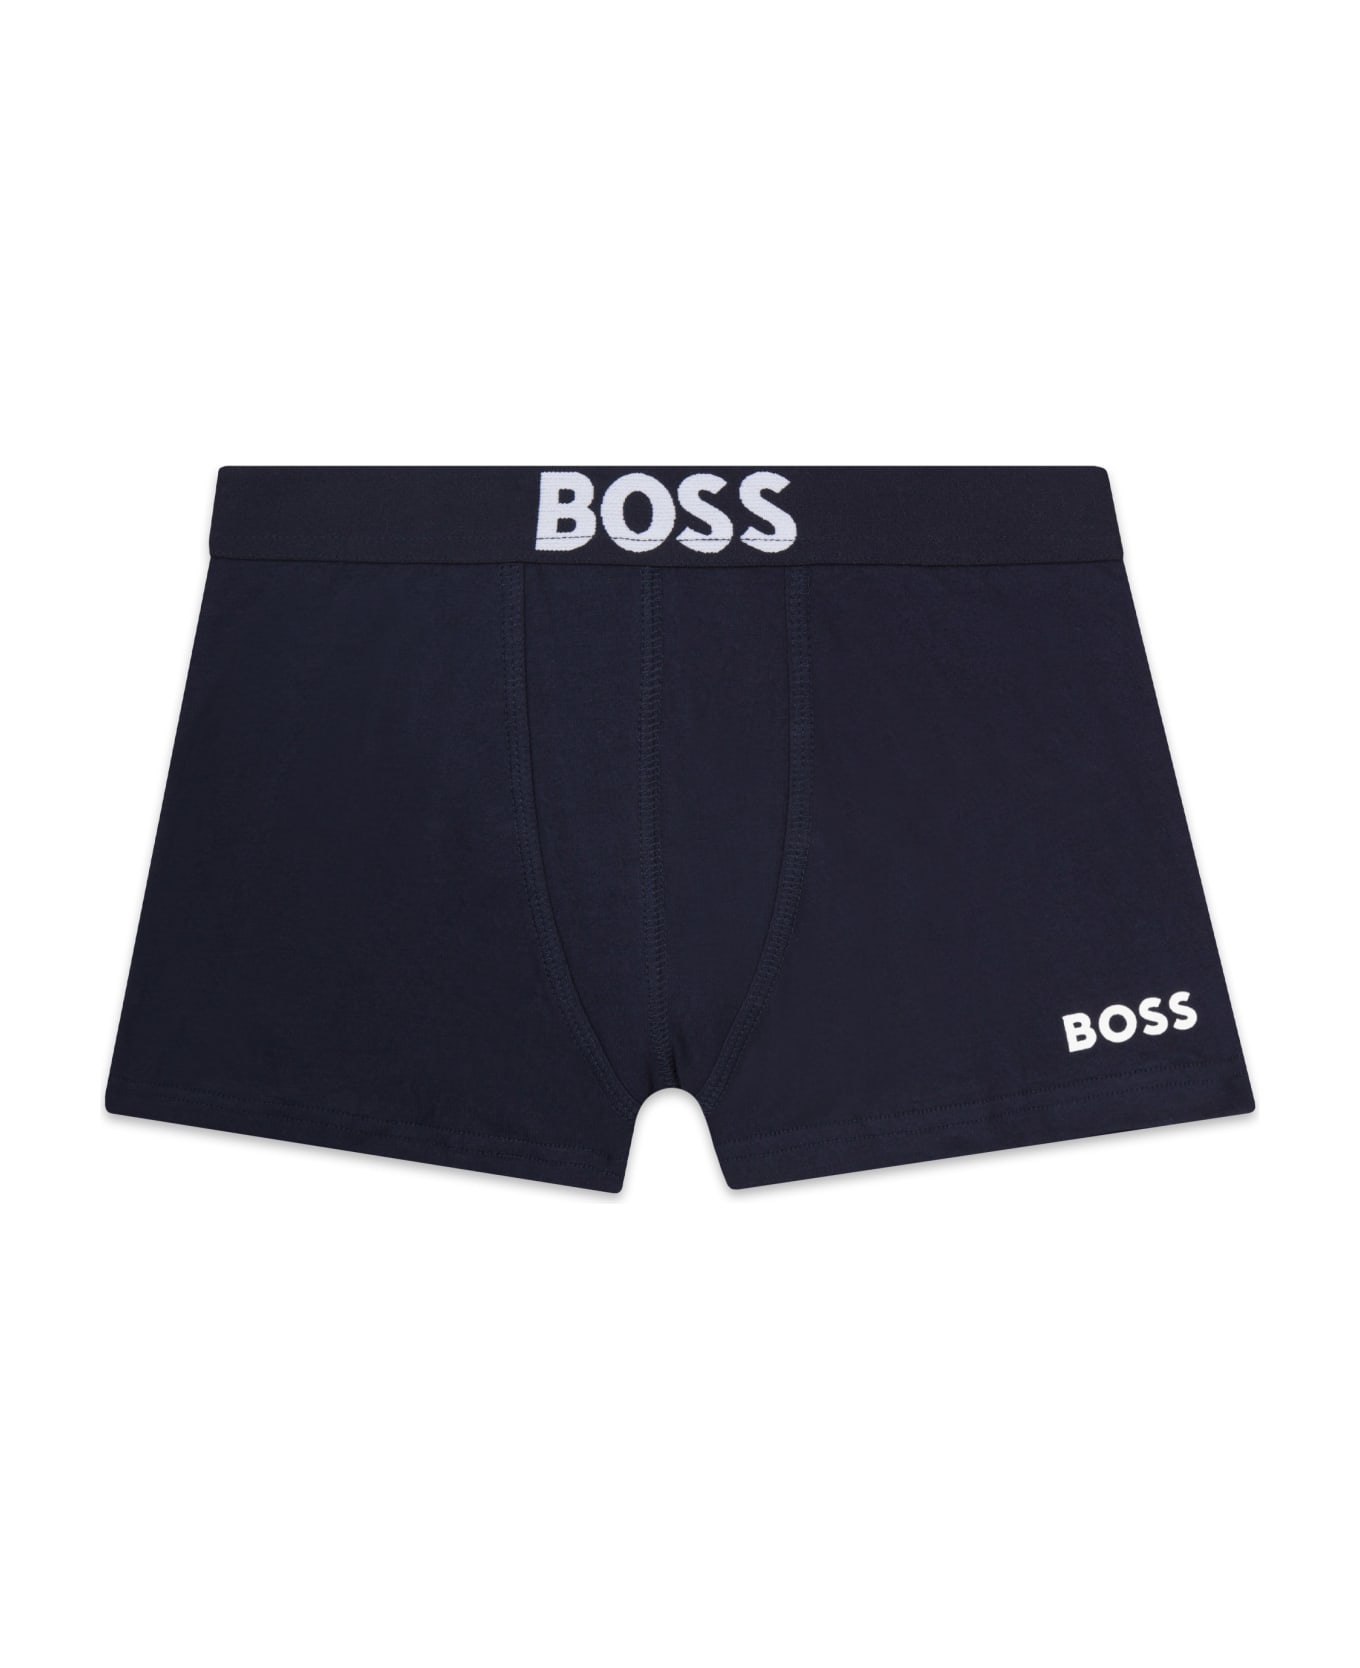 Hugo Boss Set Of 2 Boxers With Print - Blue